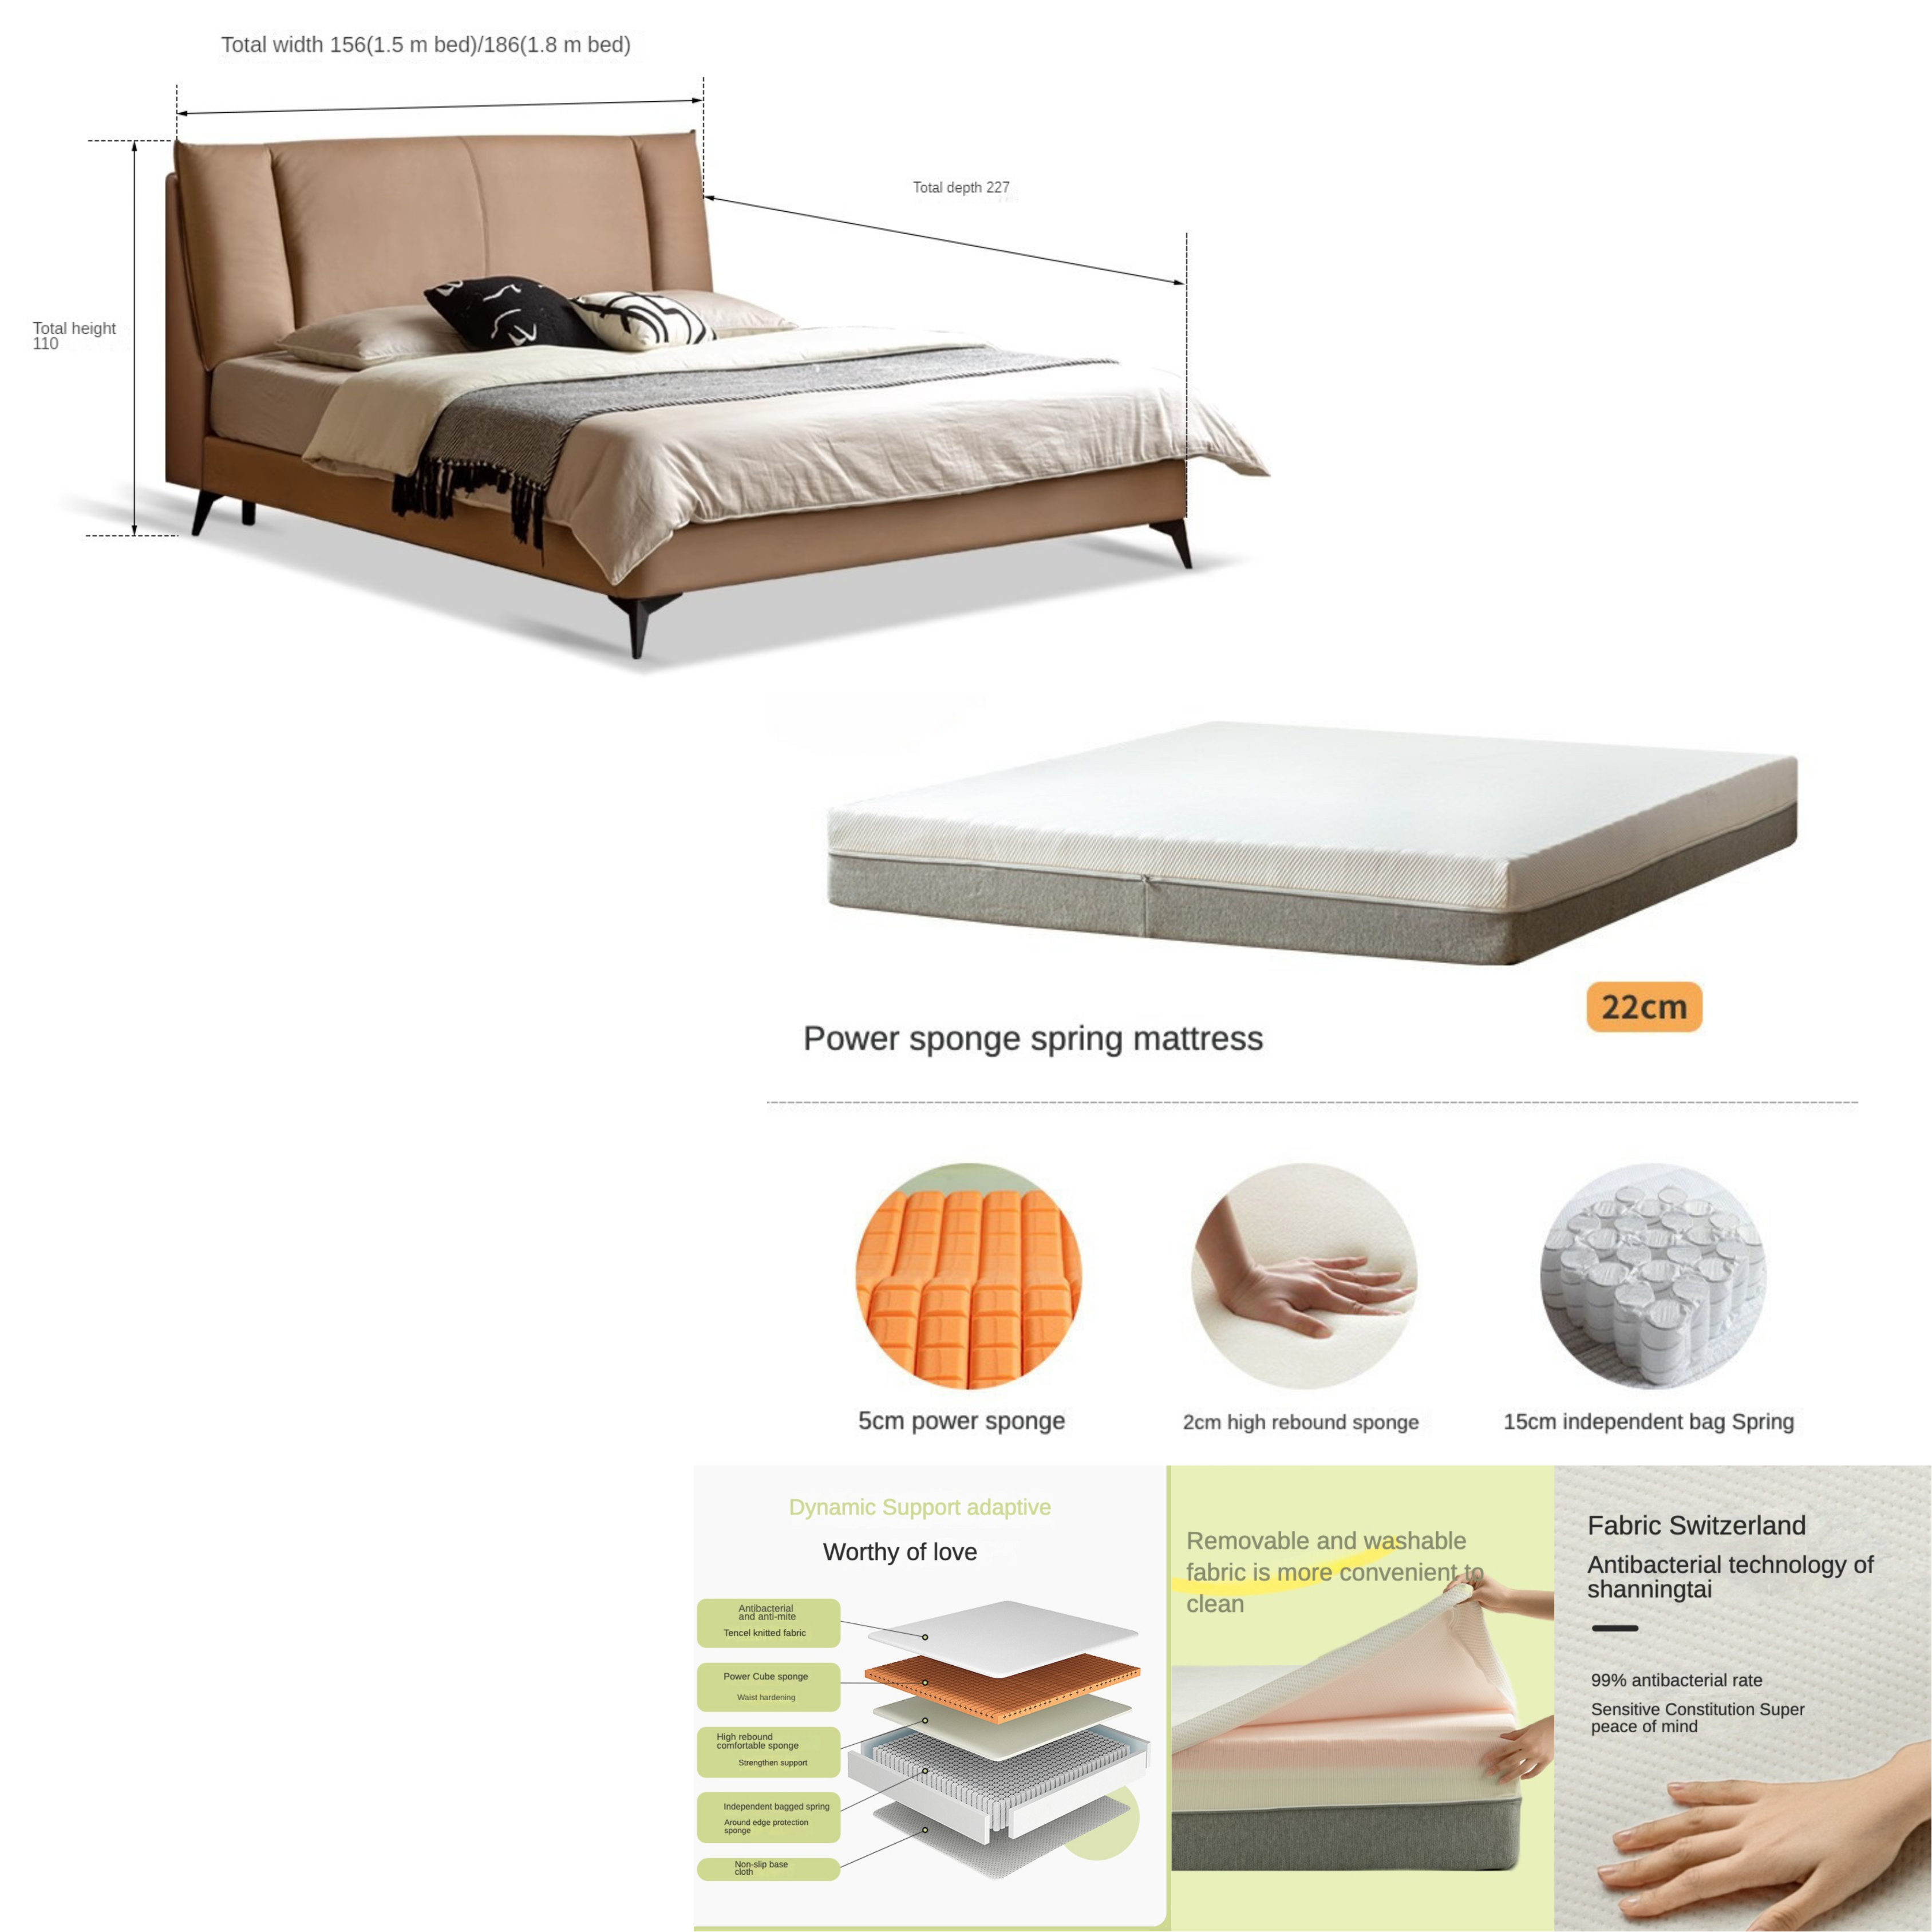 Technology Fabric Soft beige Bed "